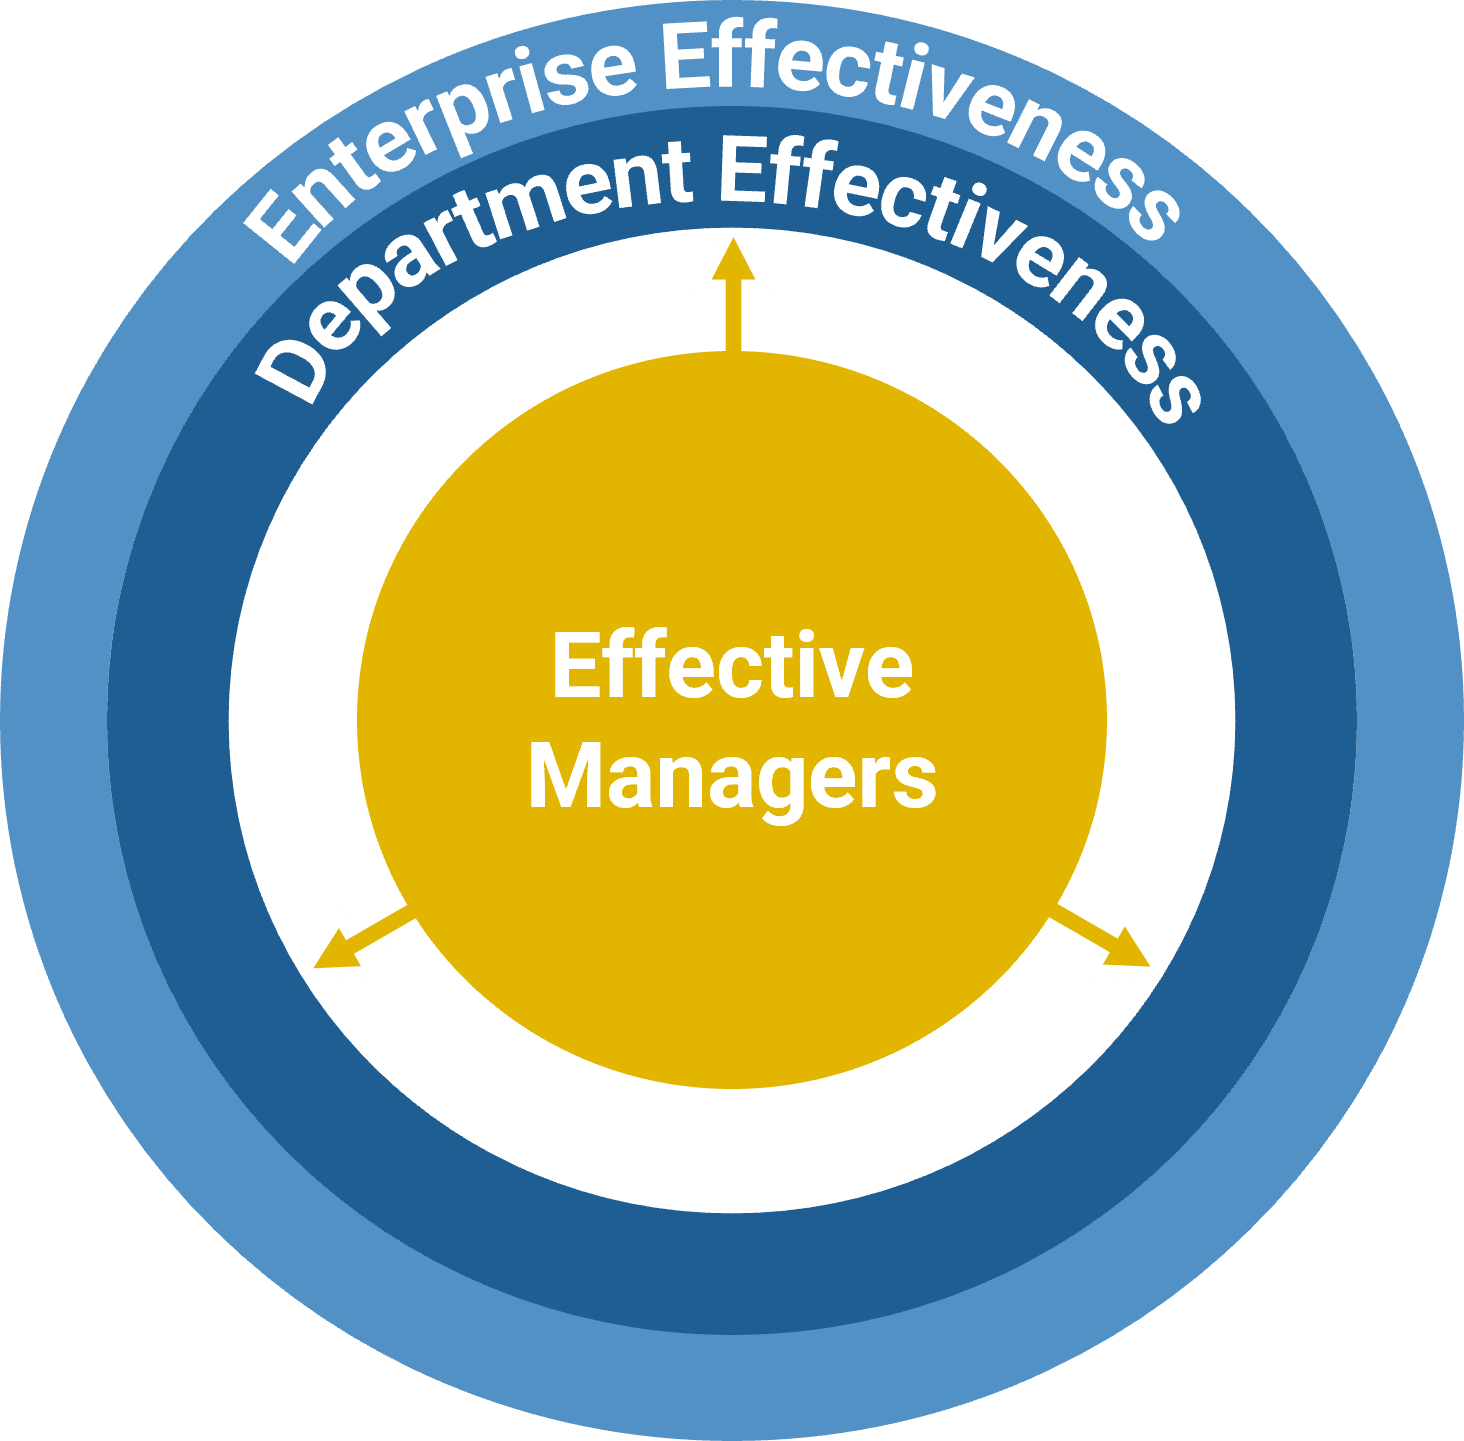 The image contains a screenshot to demonstrate effective managers.